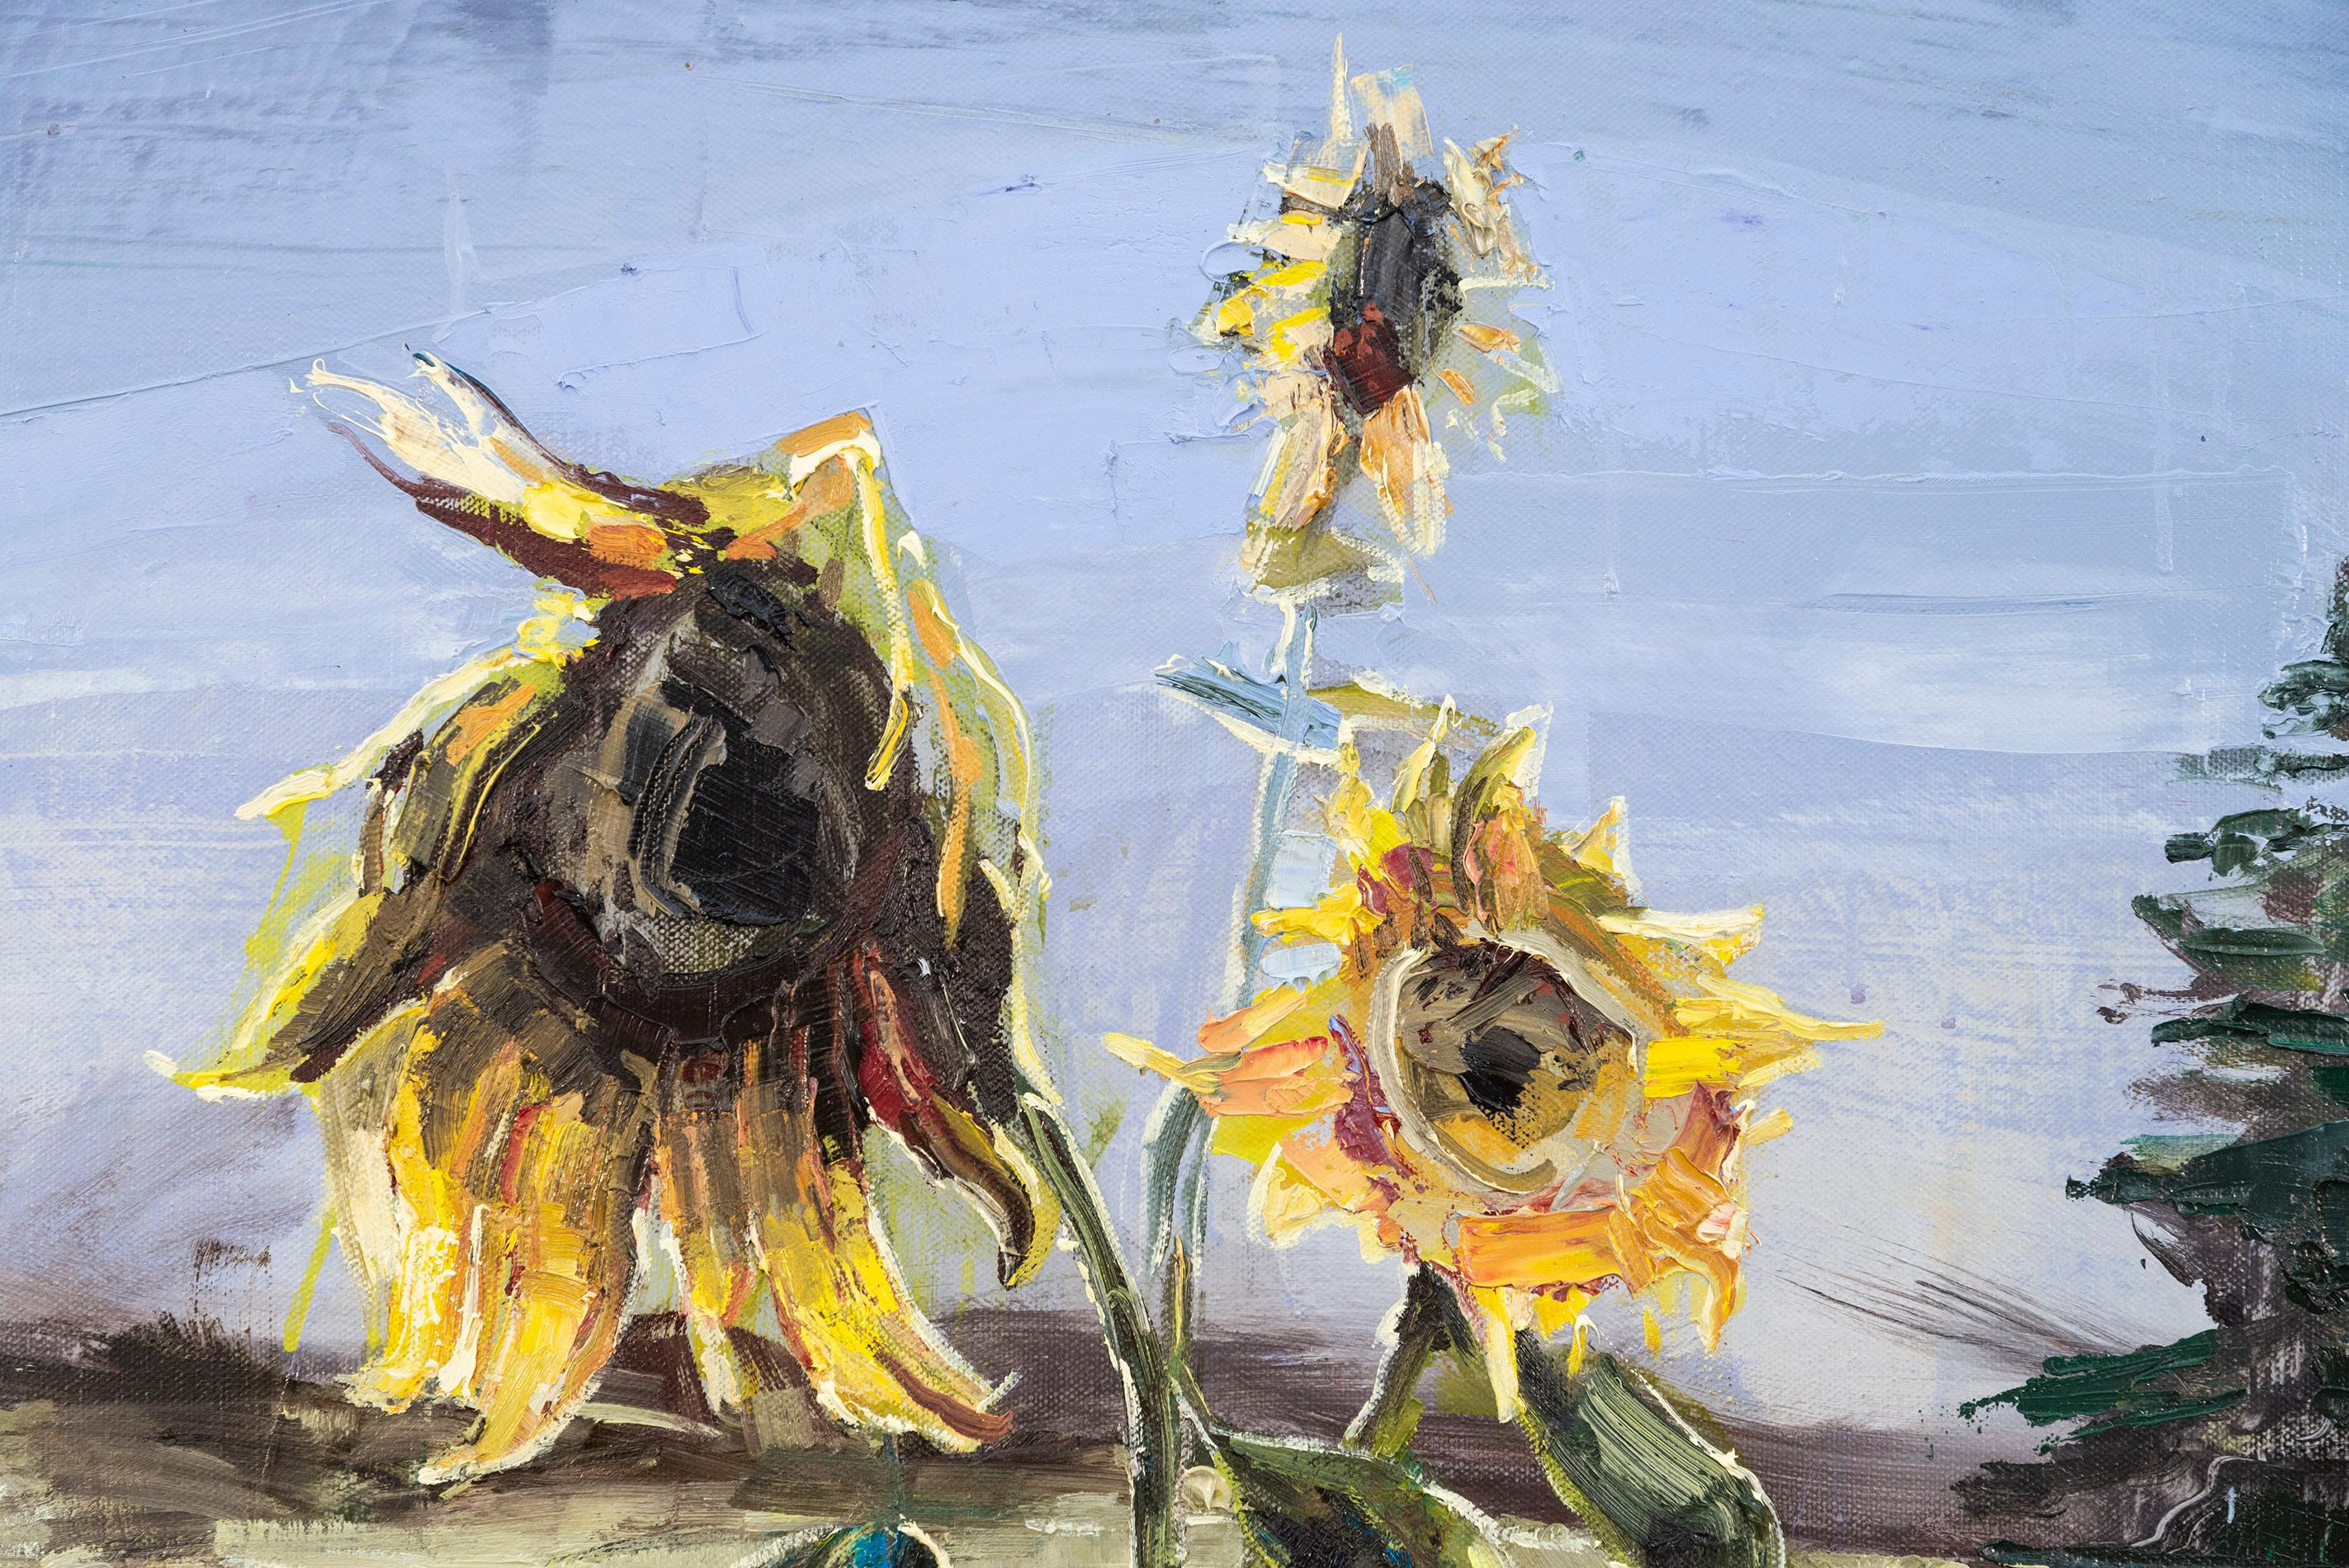 A fading sunflower stands tall in the foreground of this fall landscape by Julie Himel.
The Toronto artist, a devoted environmentalist is known for her colourful abstract paintings of the natural world. This acrylic and oil captures a single wilting